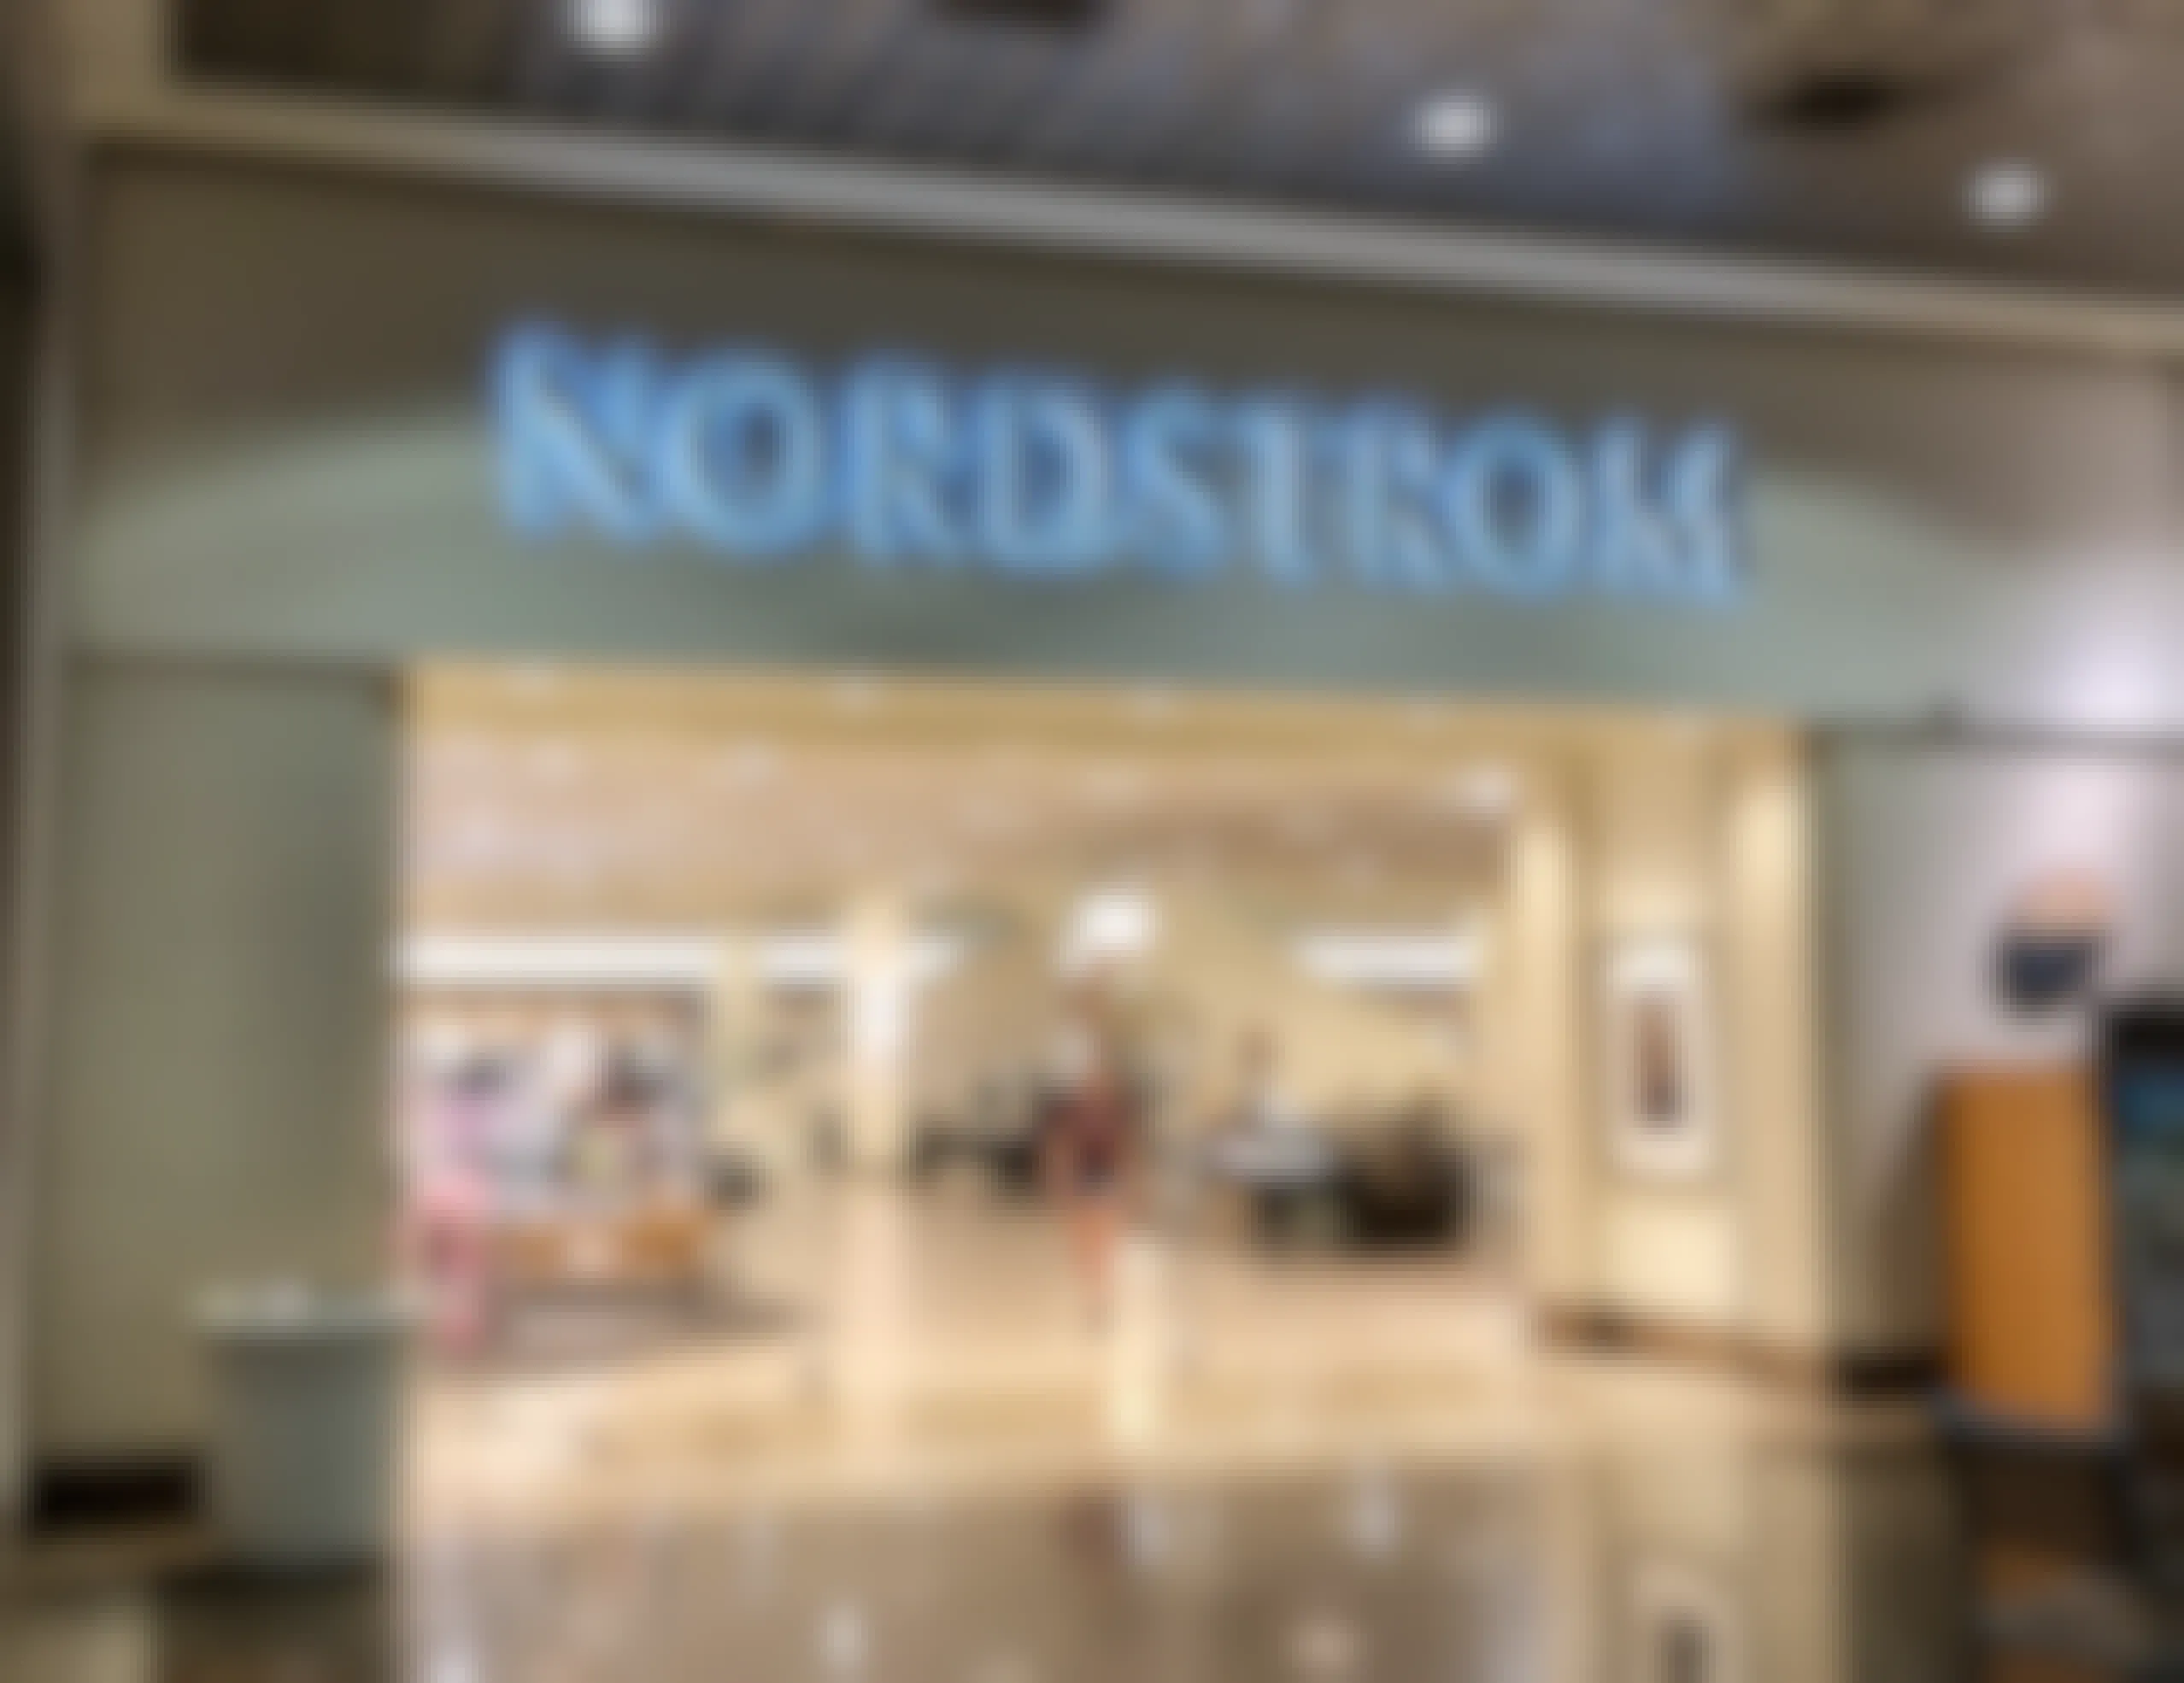 Nordstrom store, mall entrance store front.